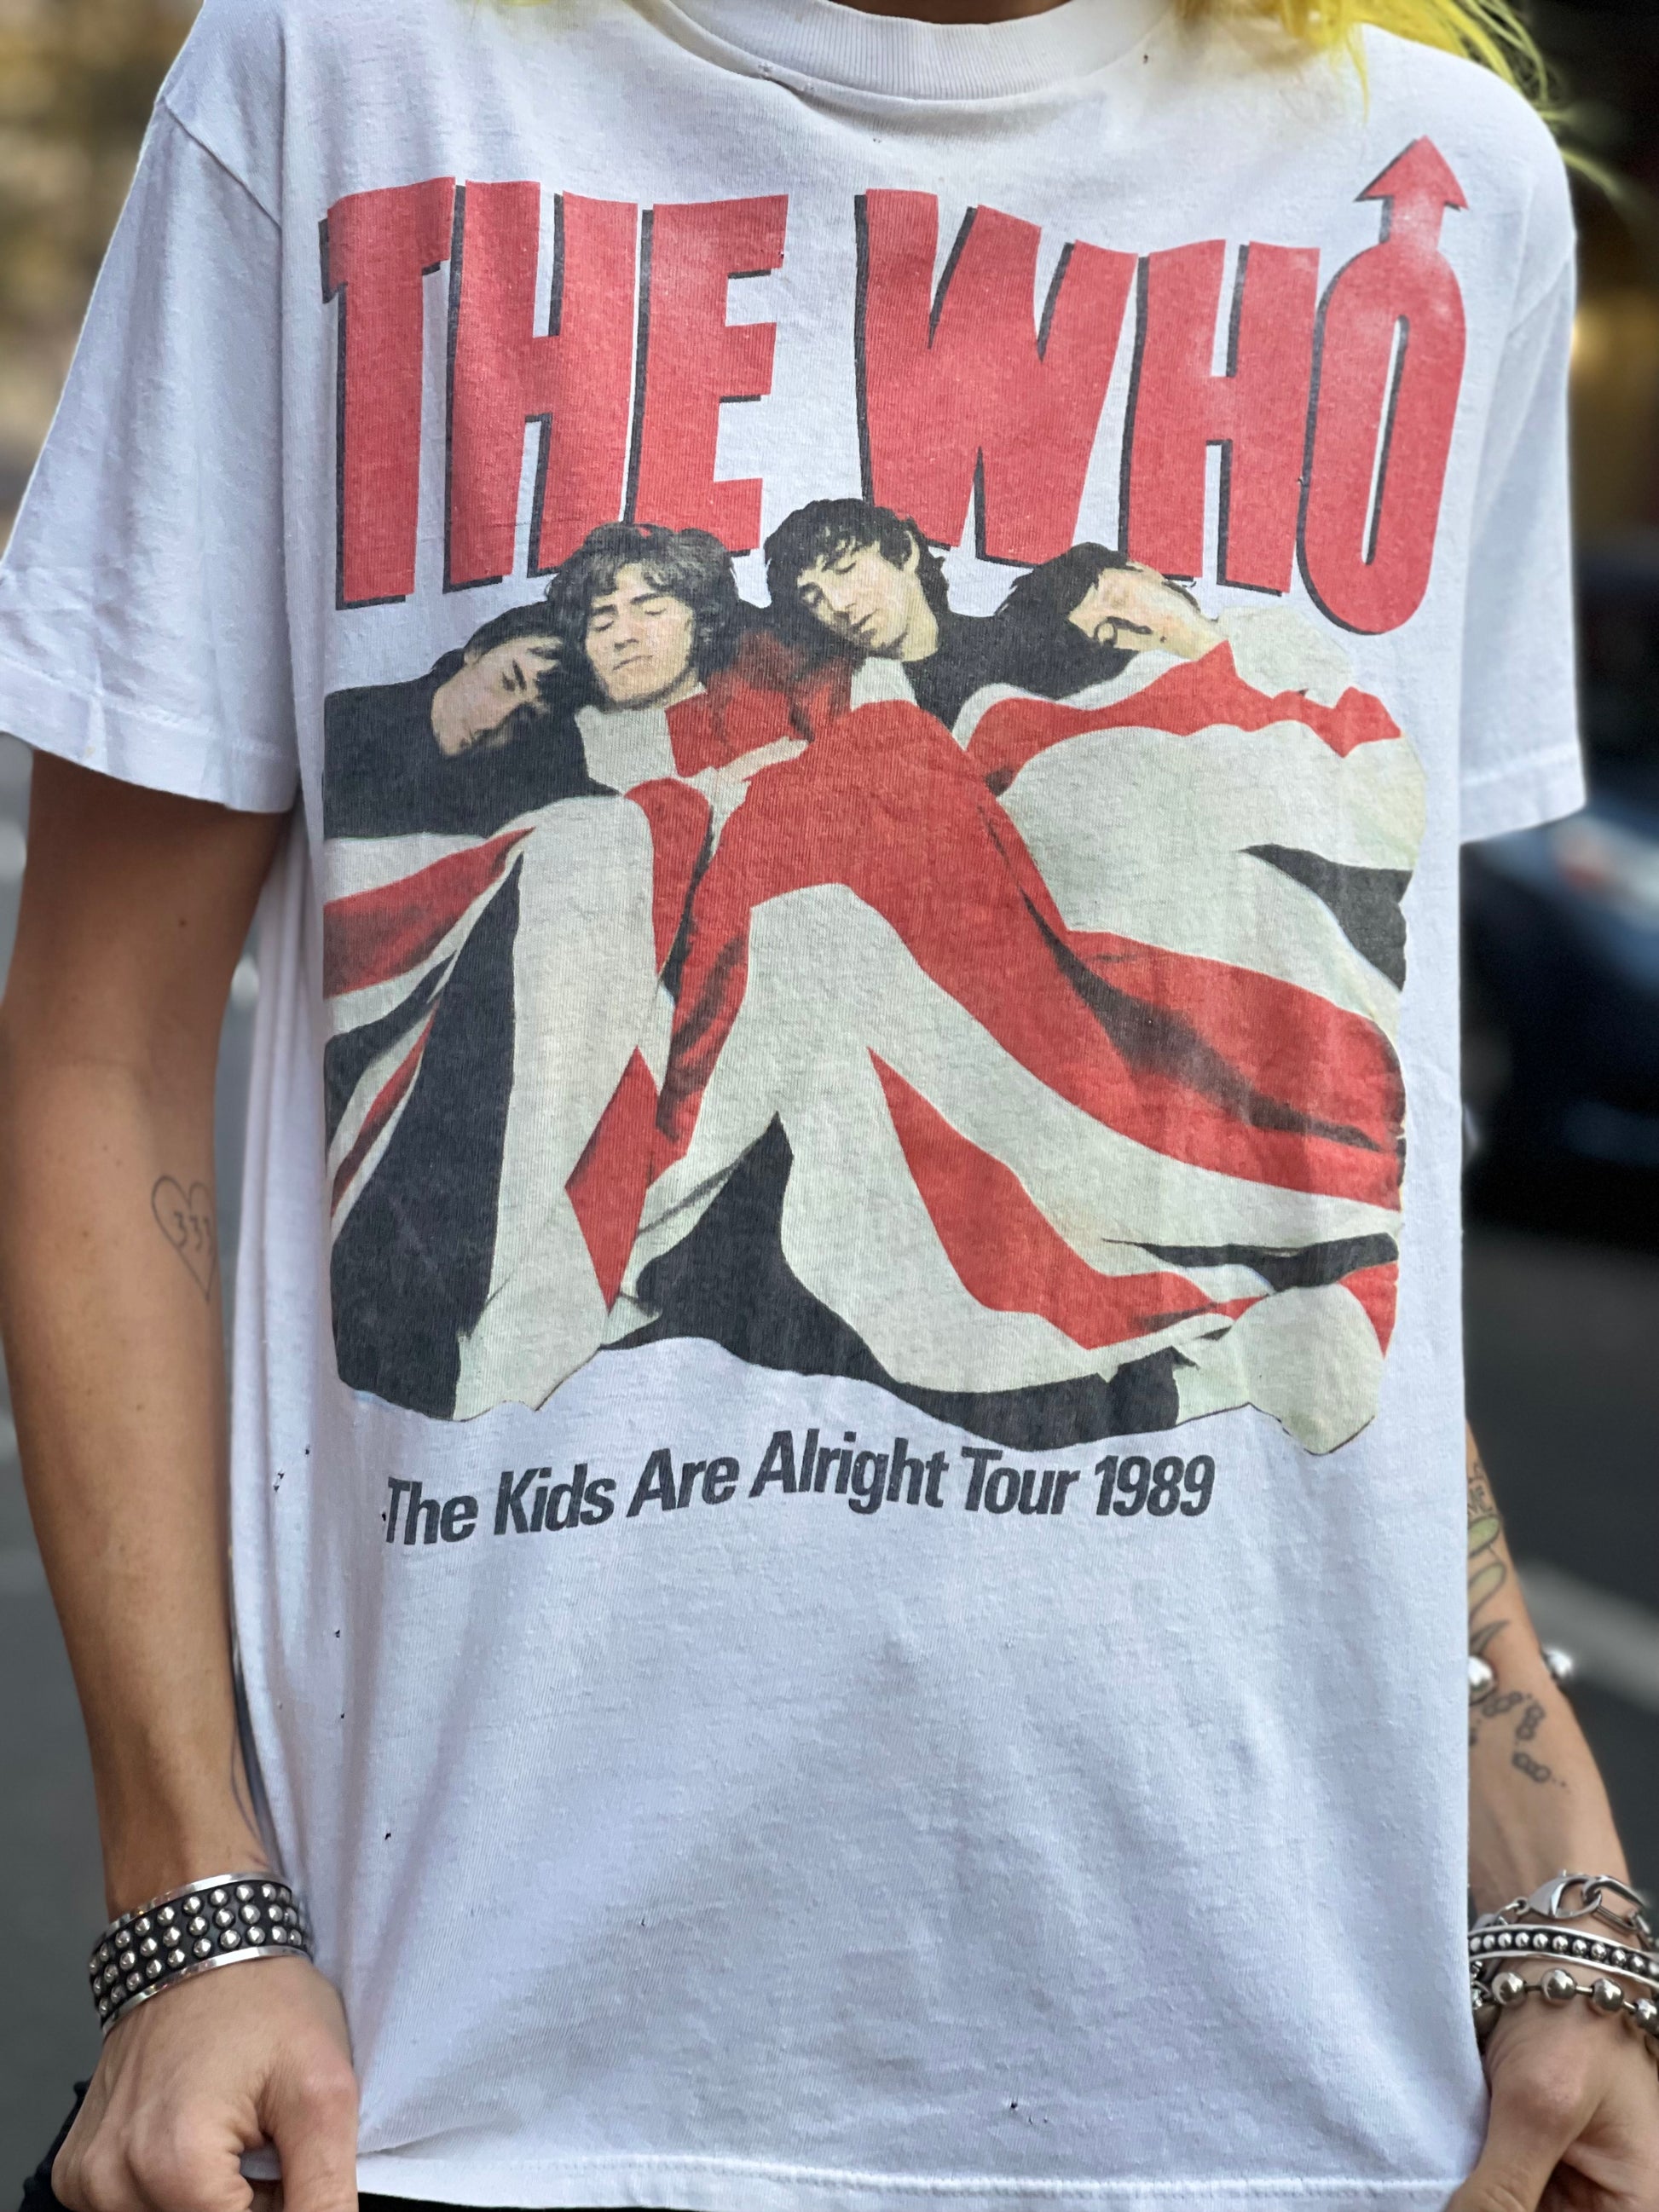 British – The Rock WHO Pretty Spark Vintage Band T-shirt